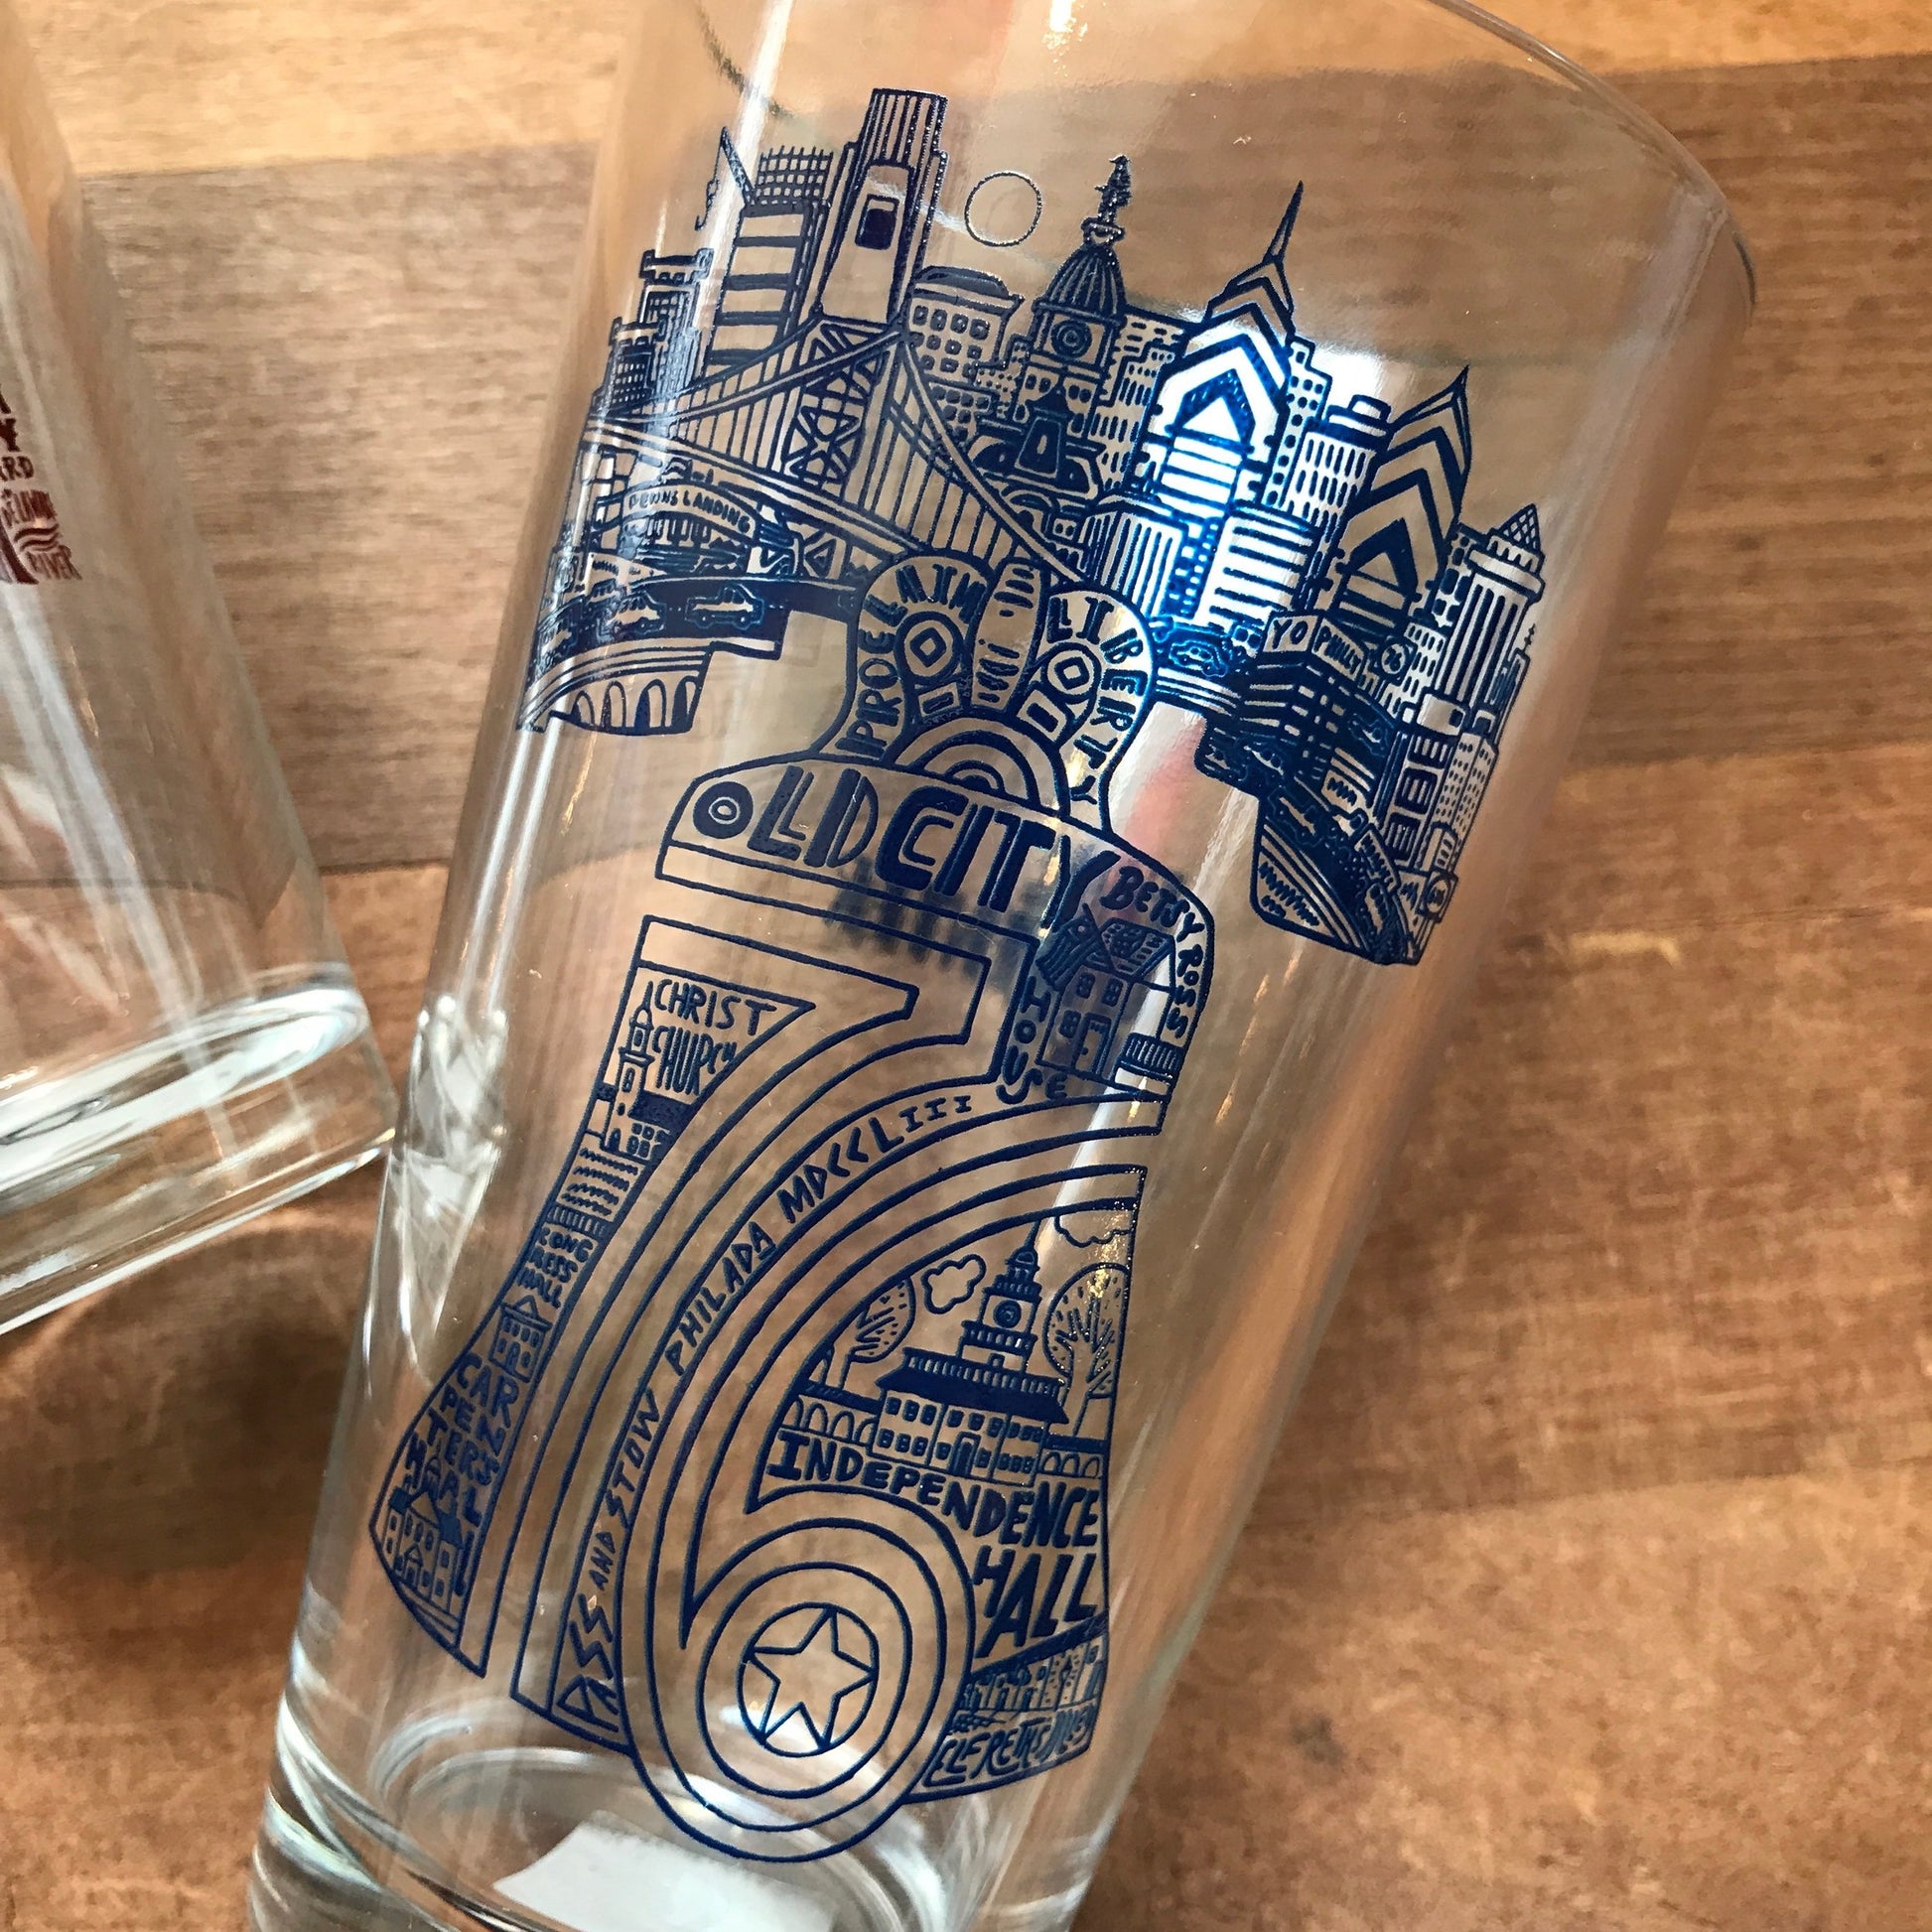 A Philly Pint Glass featuring blue illustrations and text that highlight landmarks and skyline associated with old city Philadelphia, Paul Carpenter-themed.